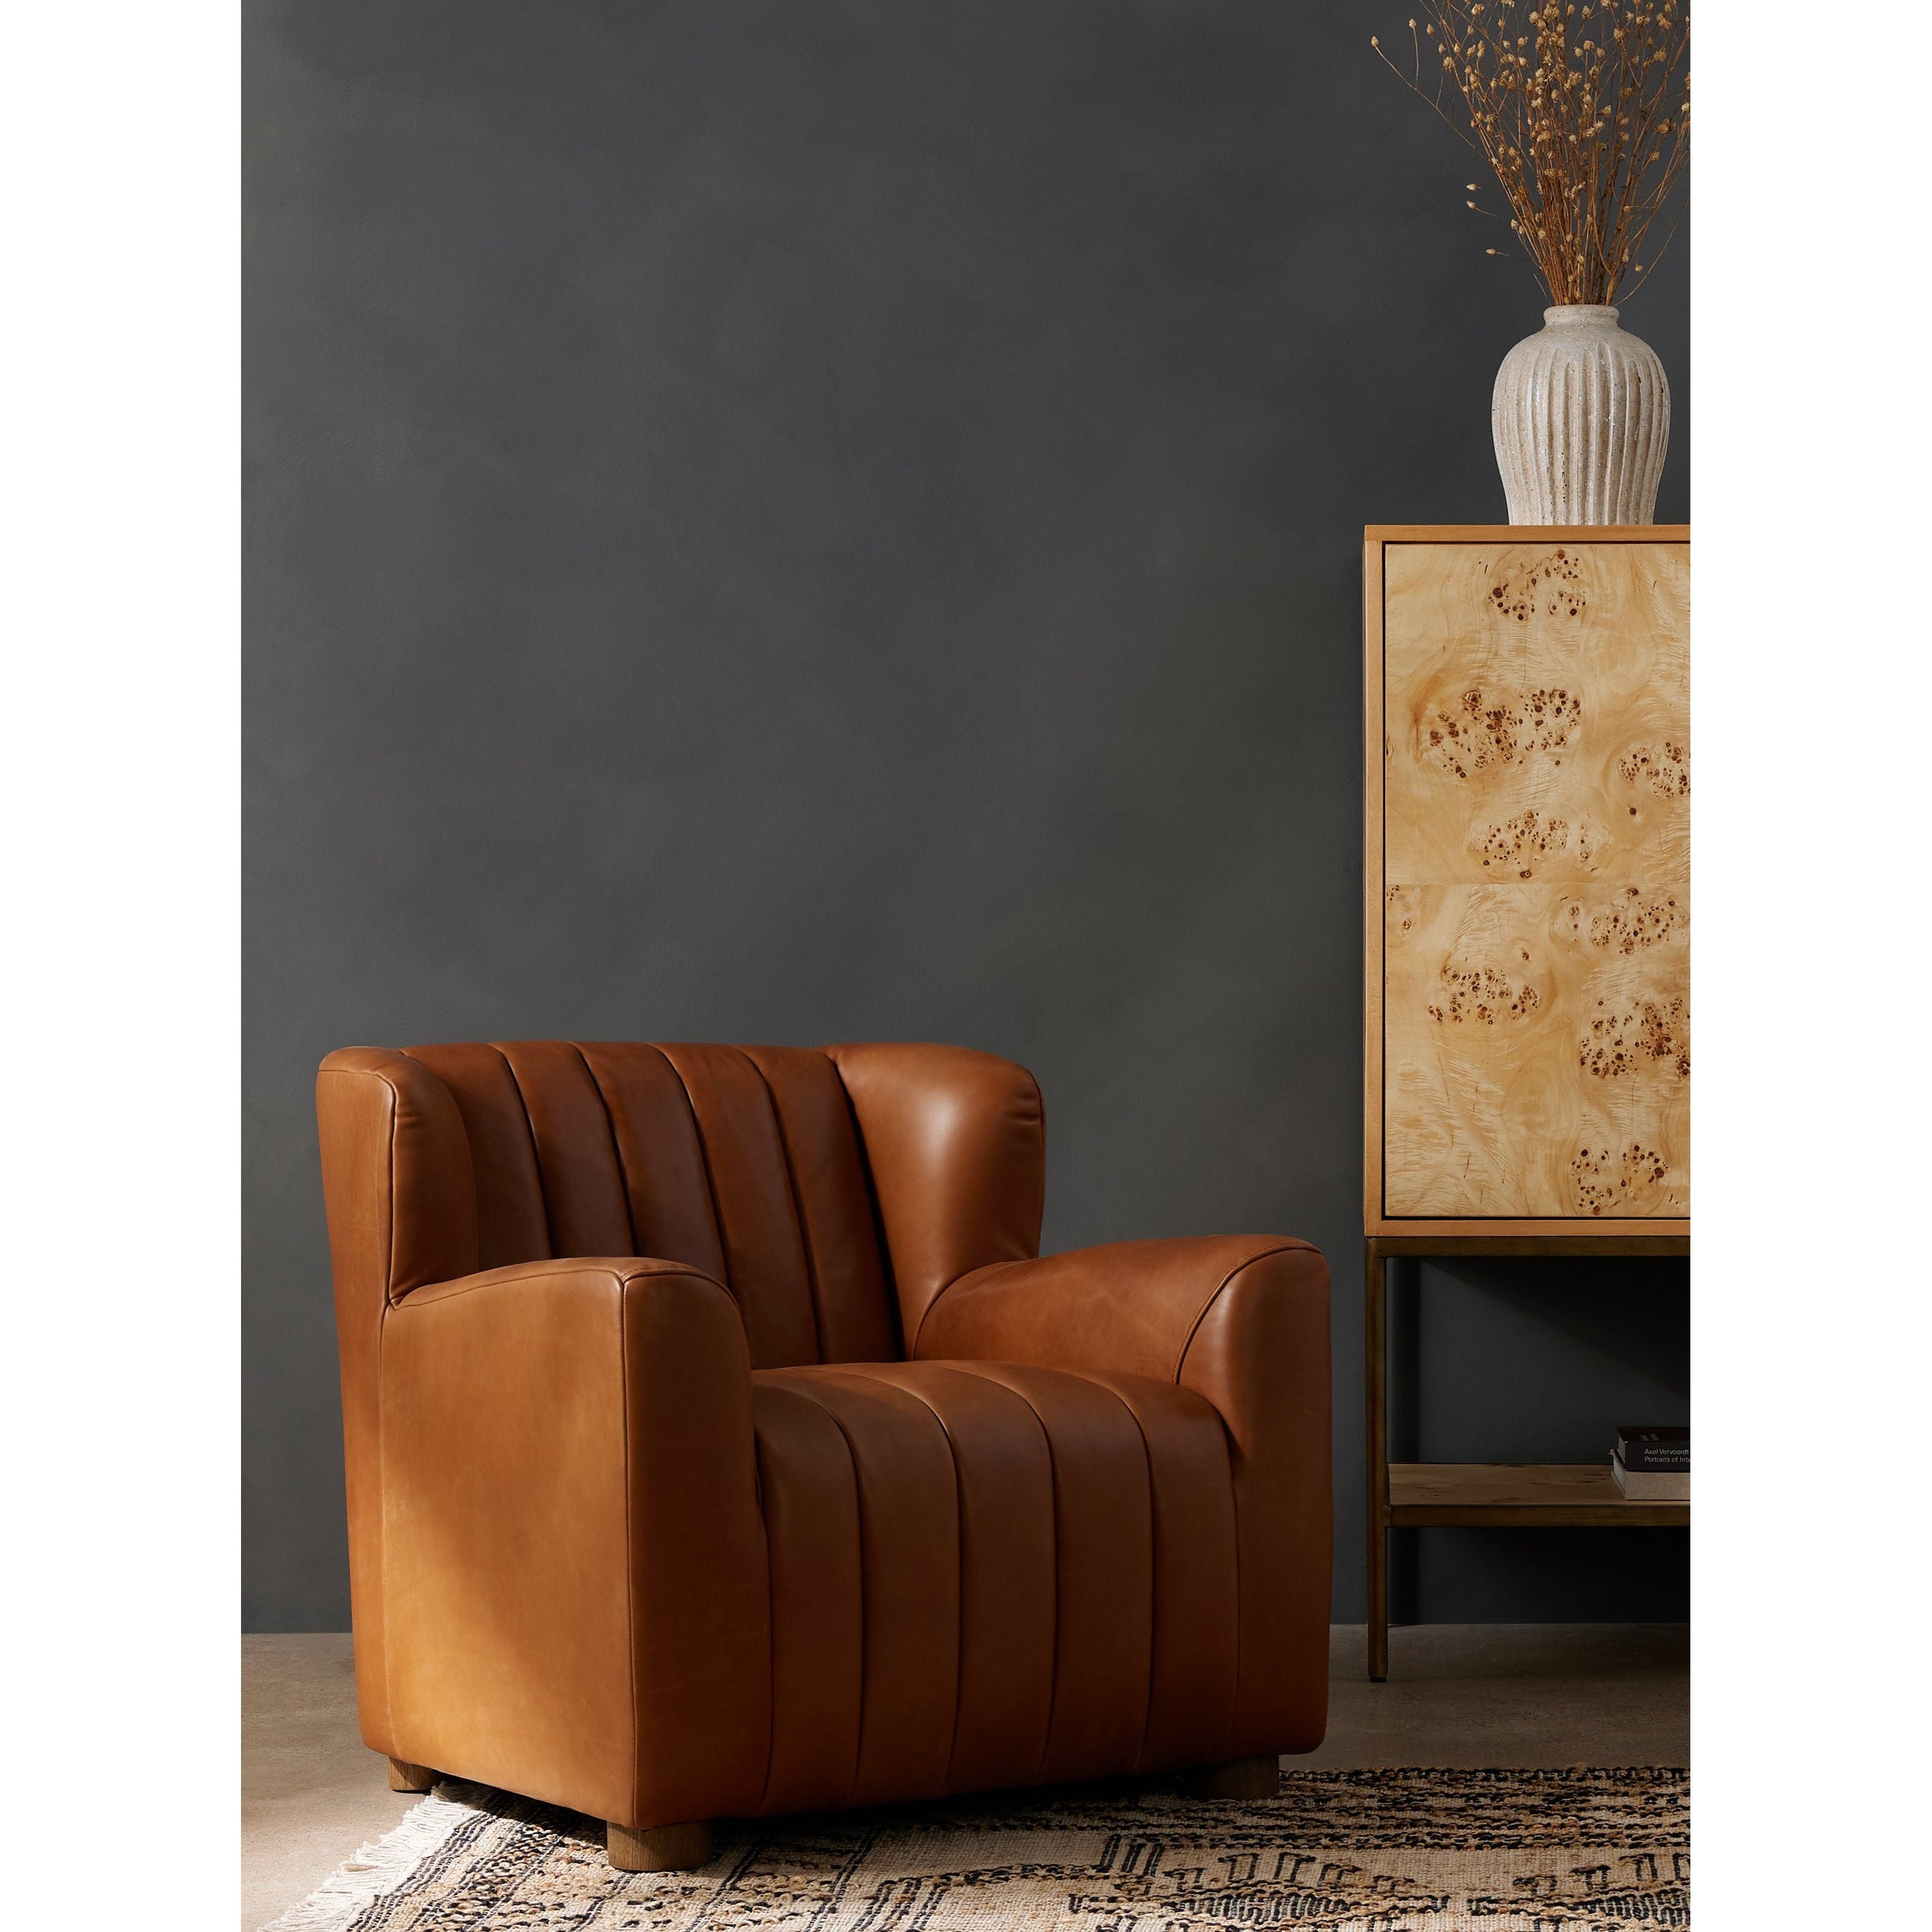 The classic wing-back club chair adopts heavy channeling for an even-comfier sit. Tobacco top-grain leather brings this retro lounge-inspired chair up to modern speed. Amethyst Home provides interior design, new construction, custom furniture, and area rugs in the San Diego metro area.